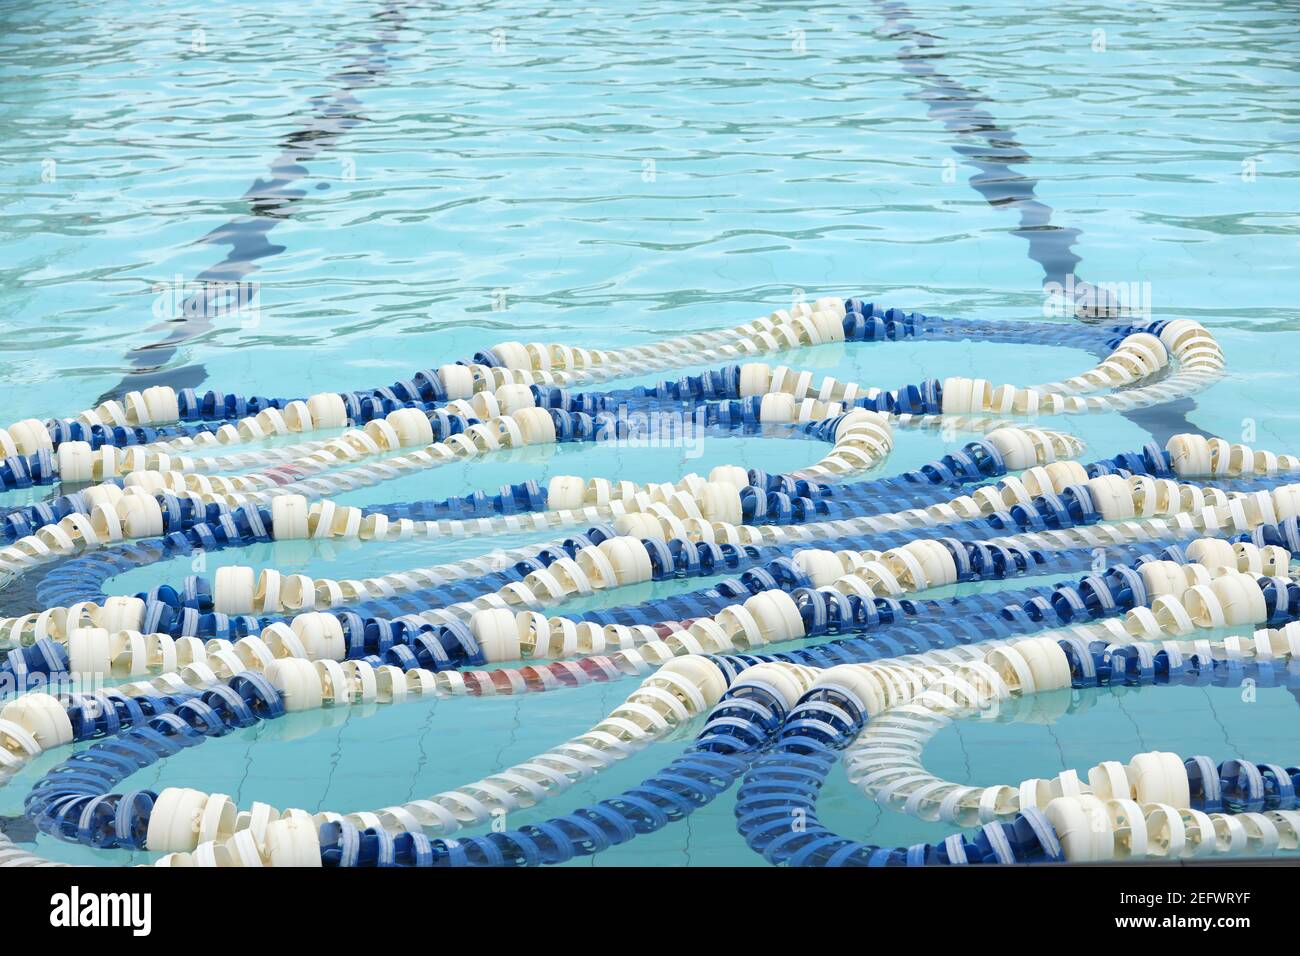 A unique view of tangled blue and white lane ropes at the end of a swimming pool. Lap lane lines visible under water. Stock Photo